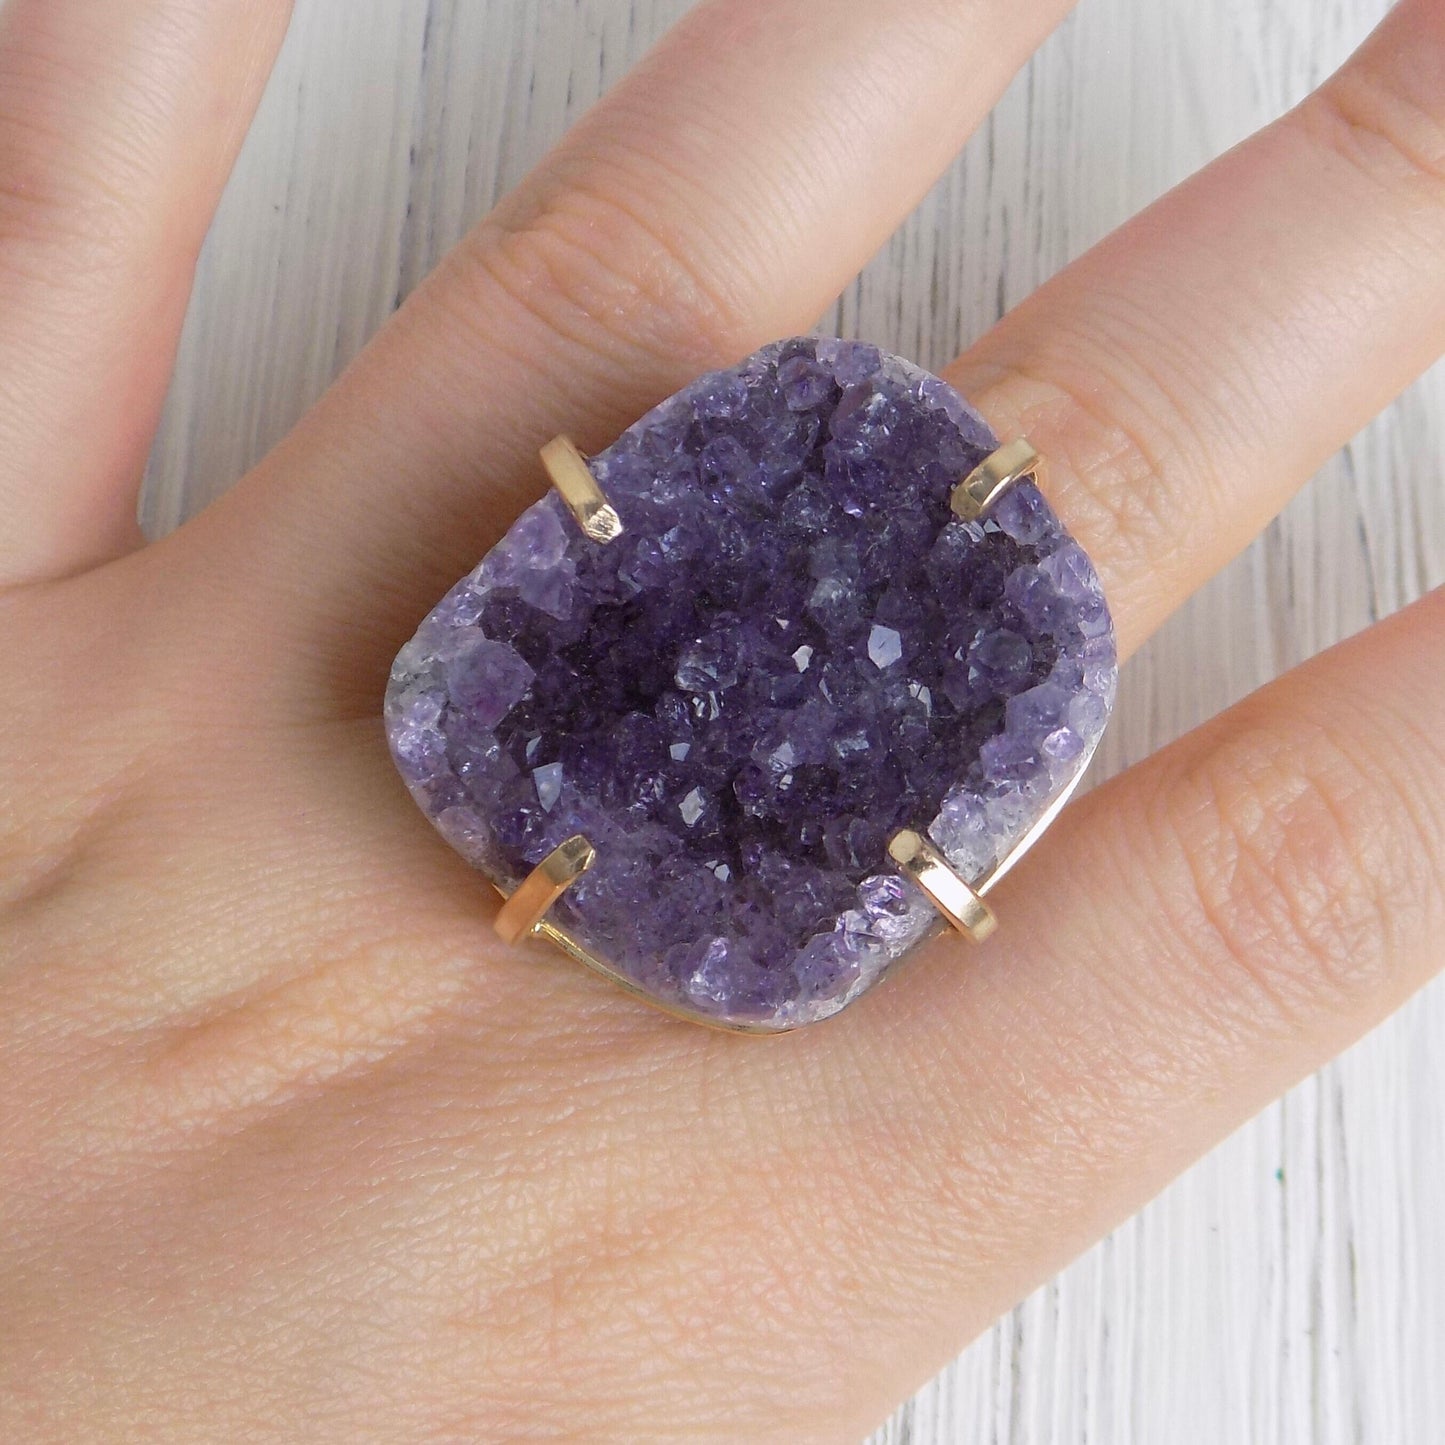 Large Raw Amethyst Druzy Ring Gold Adjustable, Purple Crystal Statement Rings For Women, G14-207